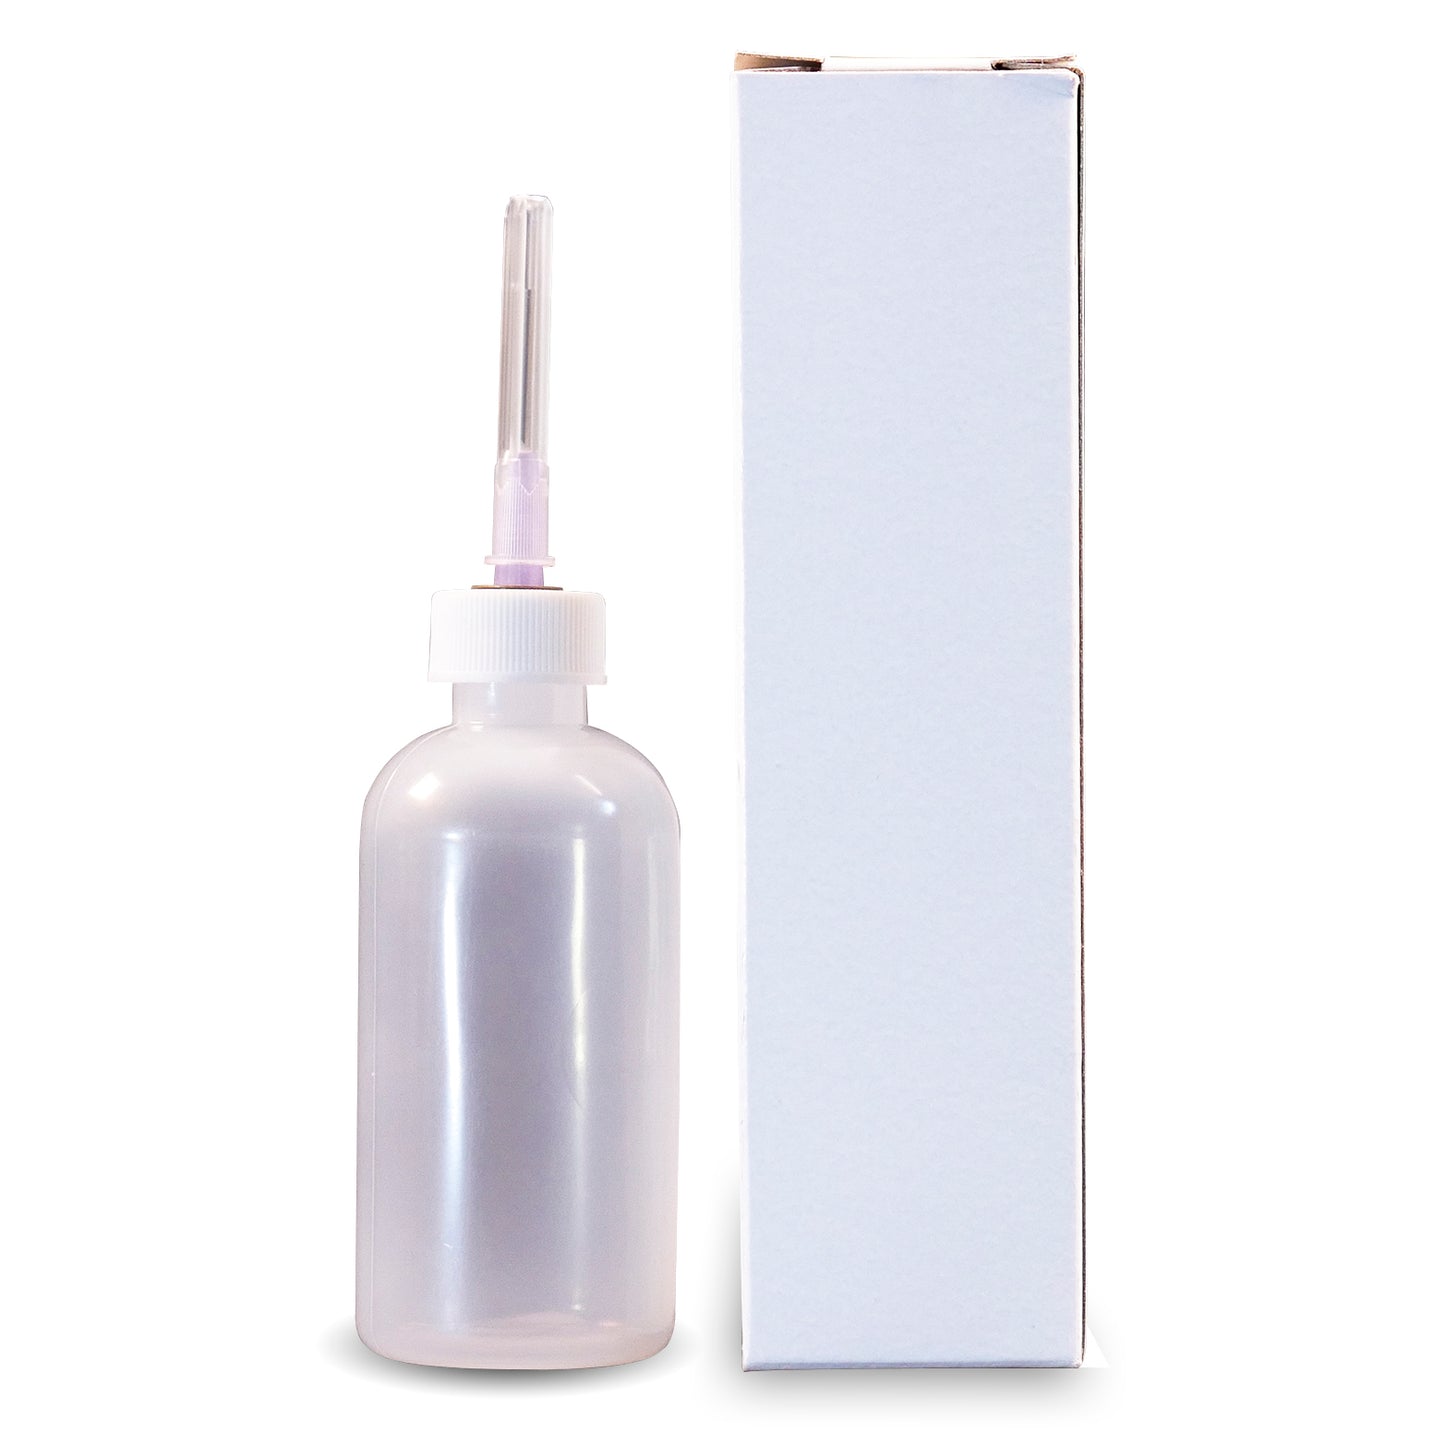 4 ounce Hypo Bottle and Applicator